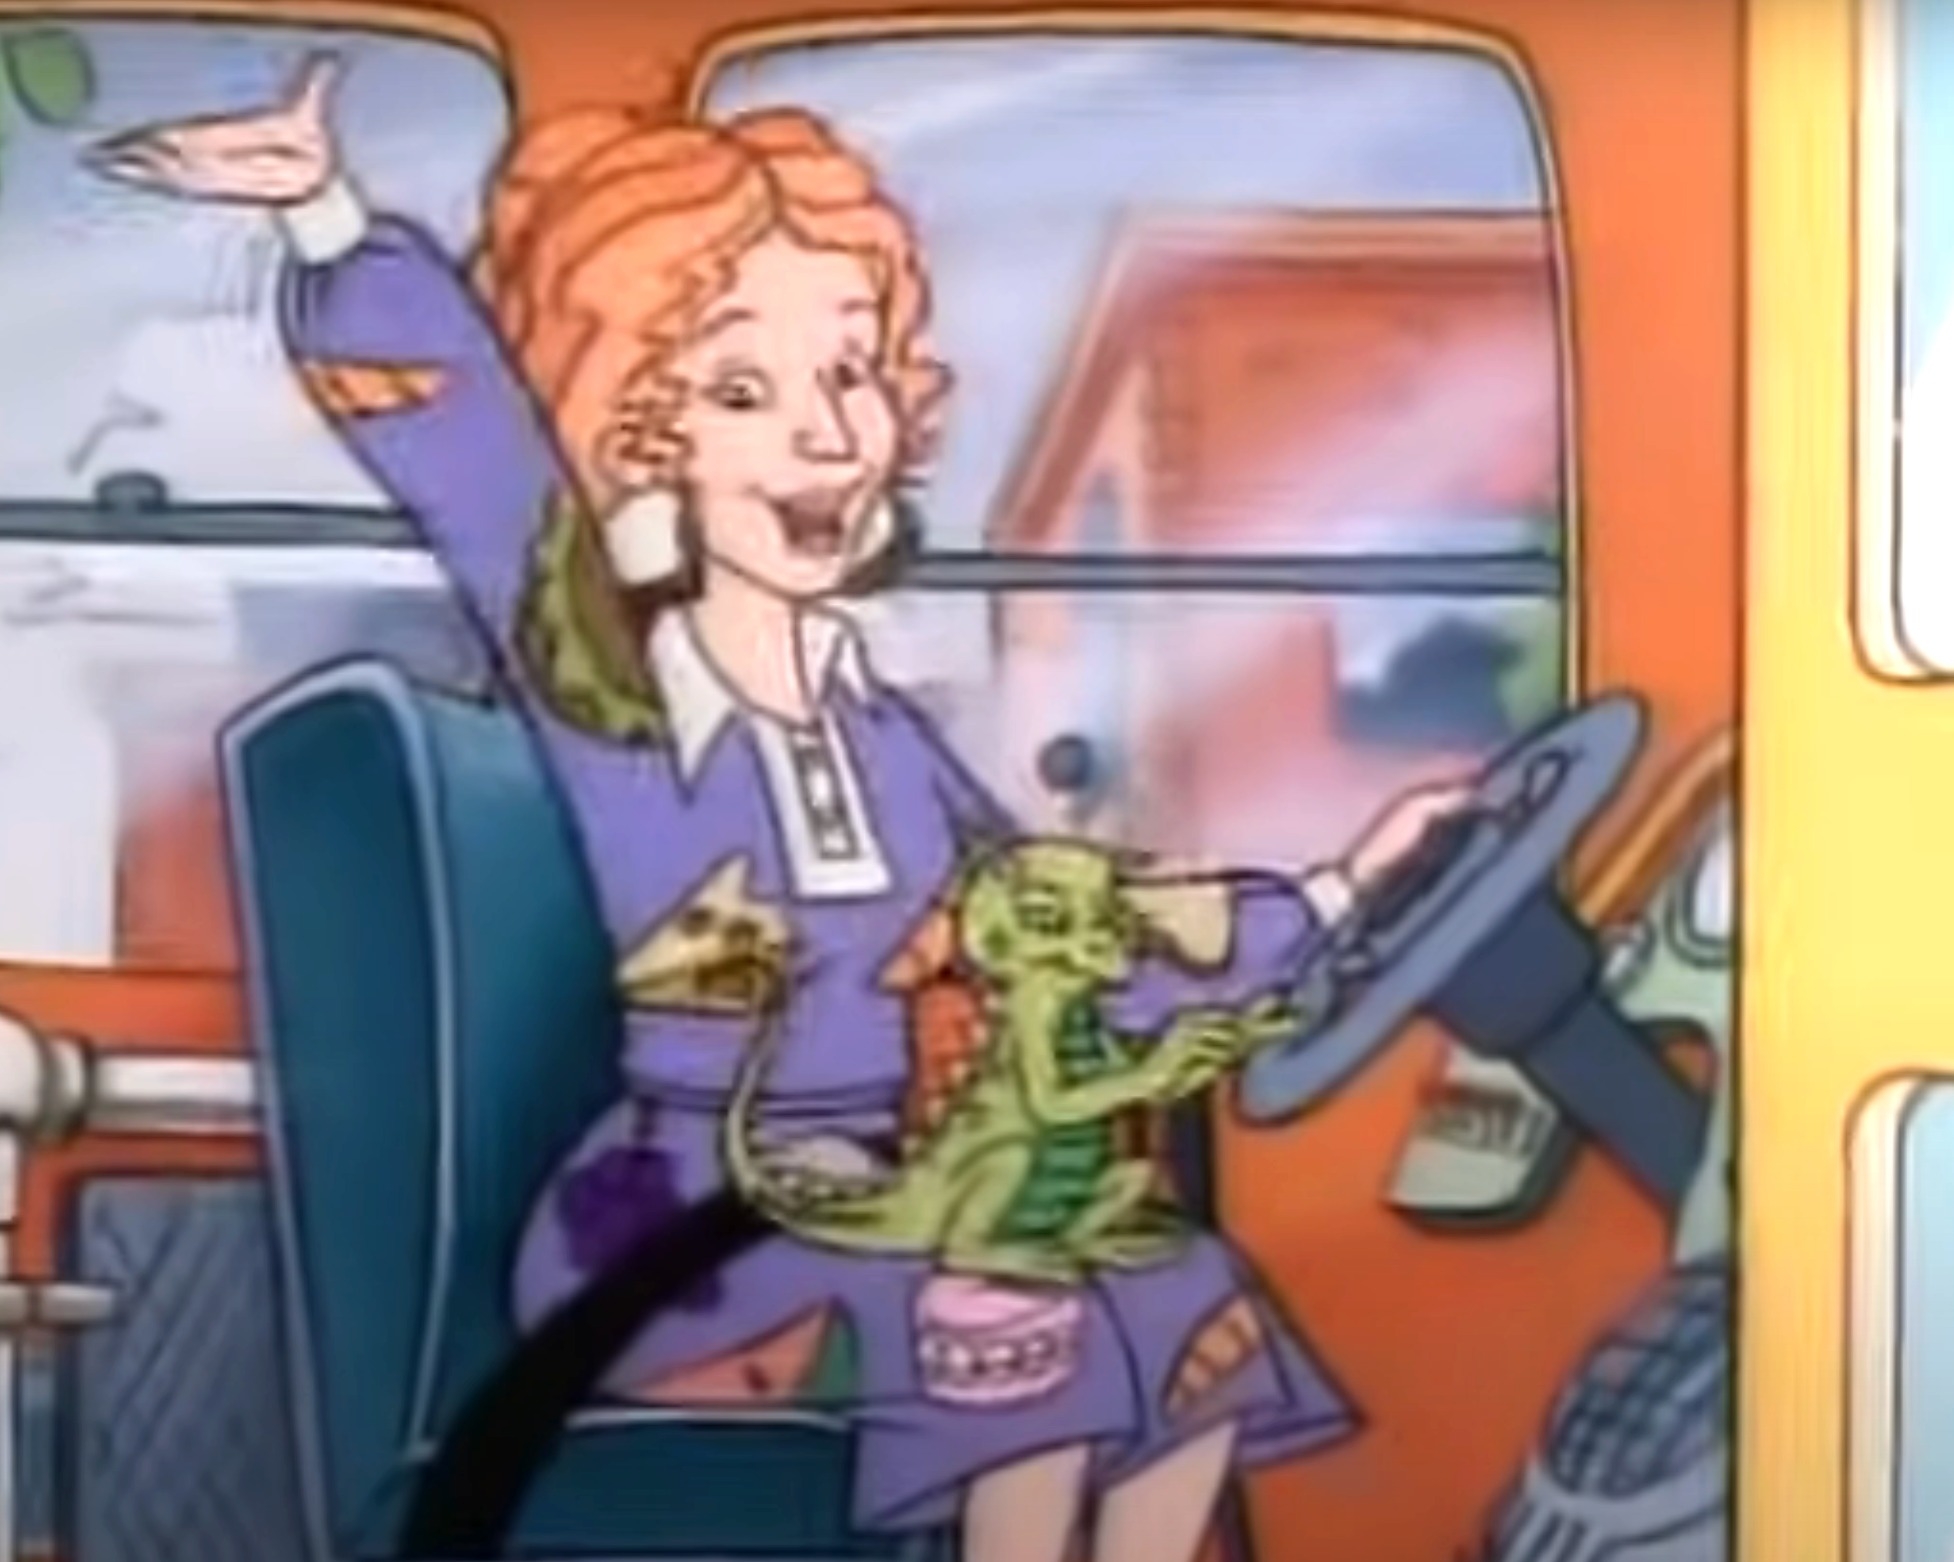 Animated character driving a bus